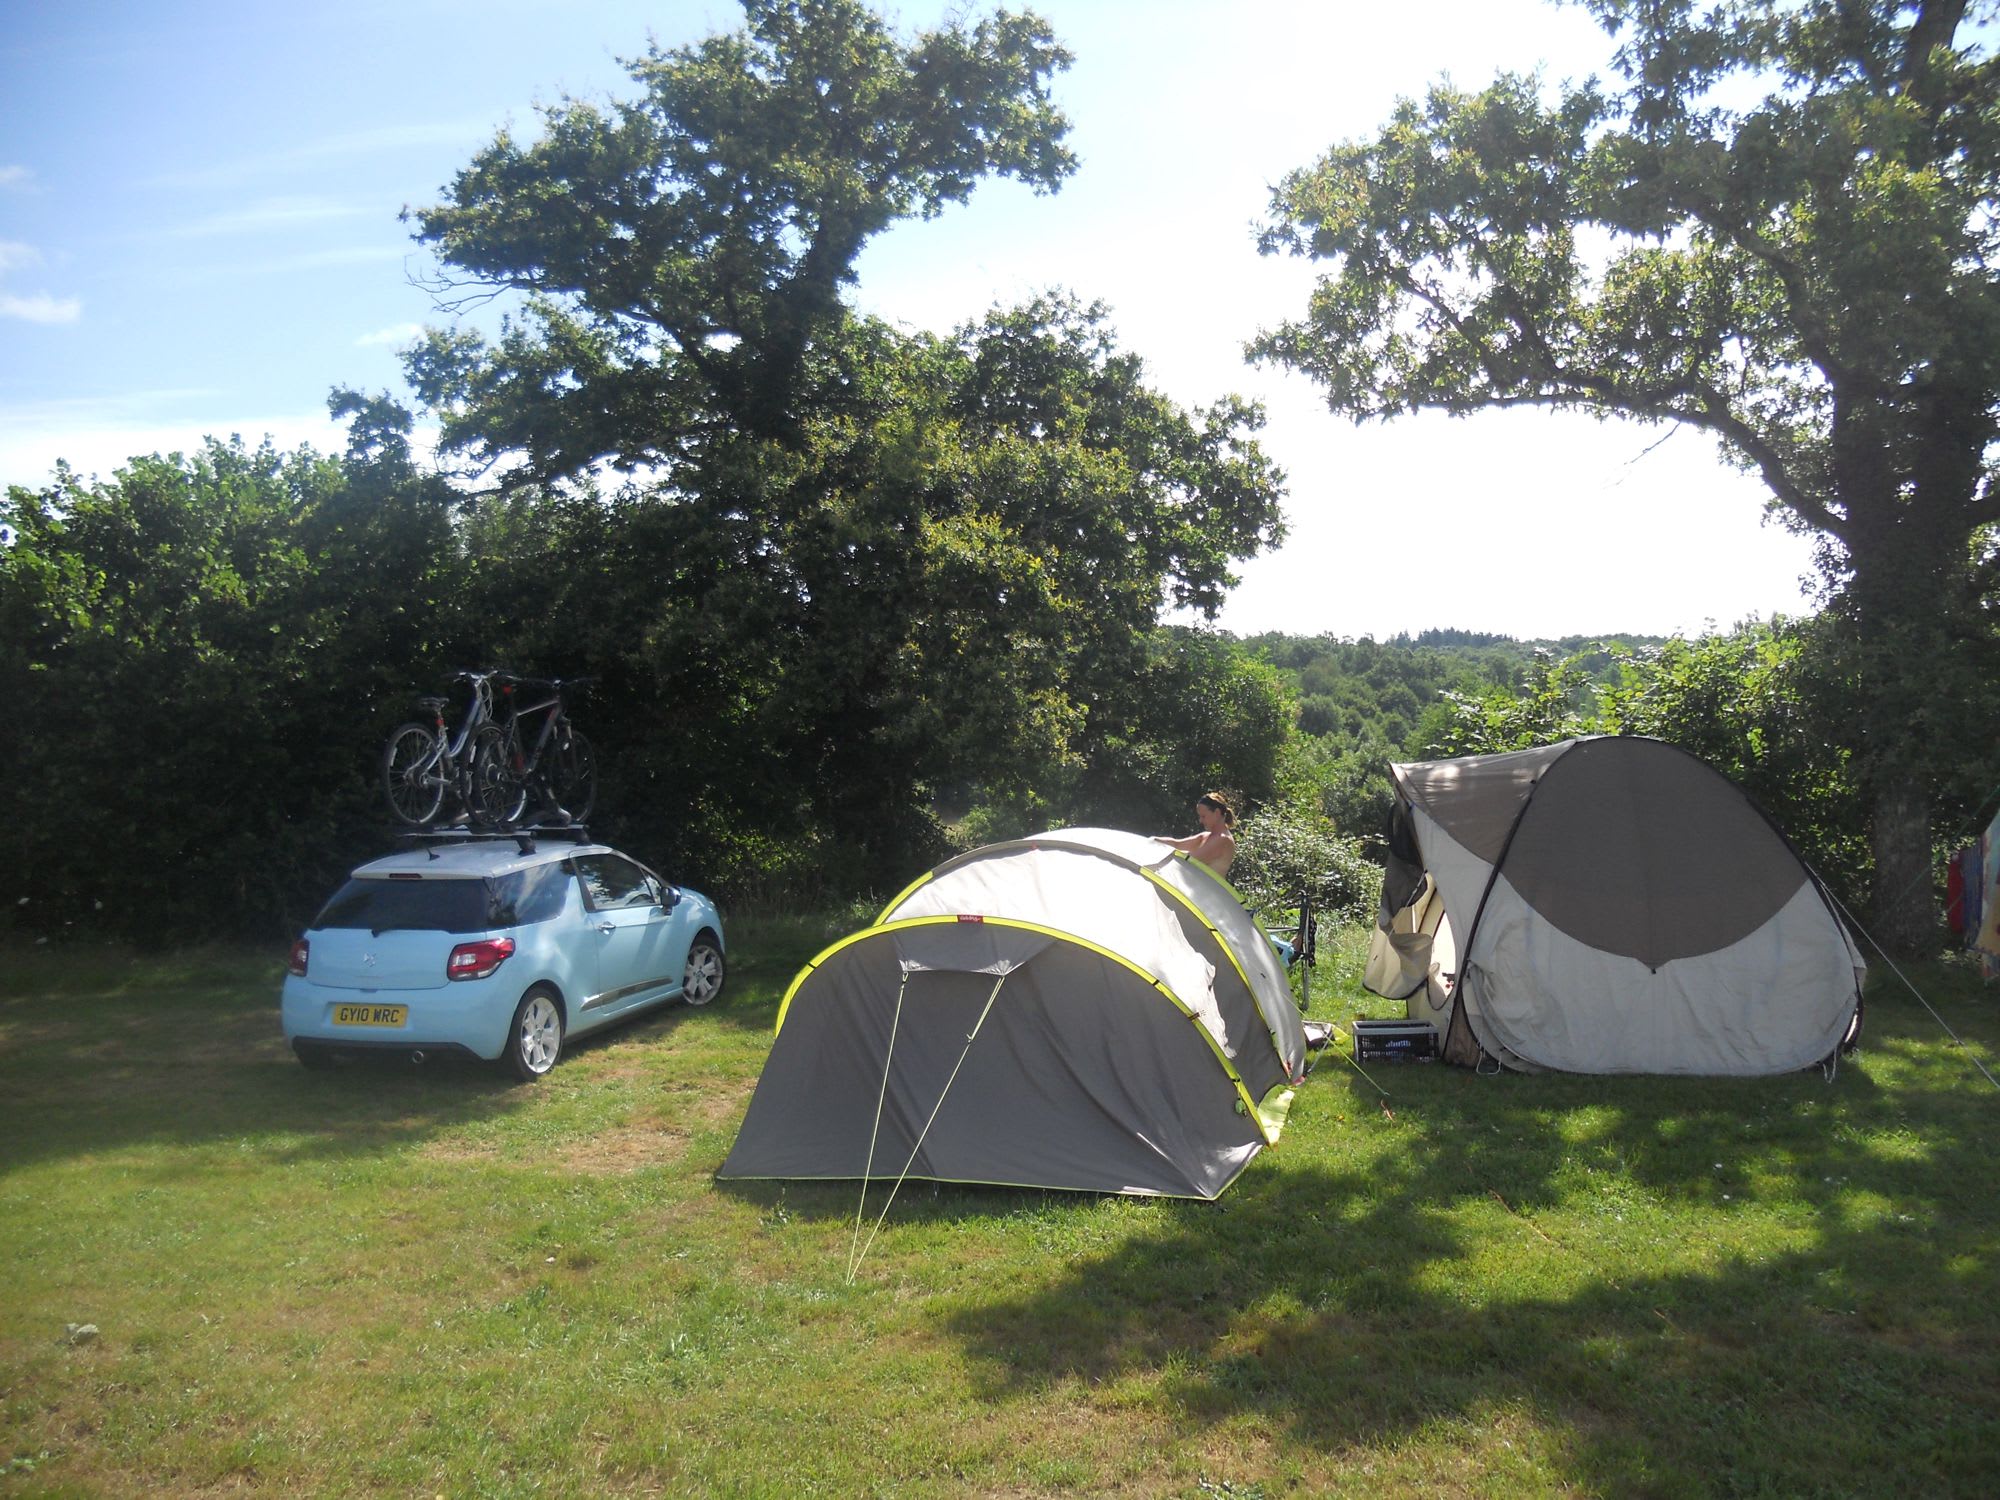 Traditional, riverside camping in France's second sunniest region. 